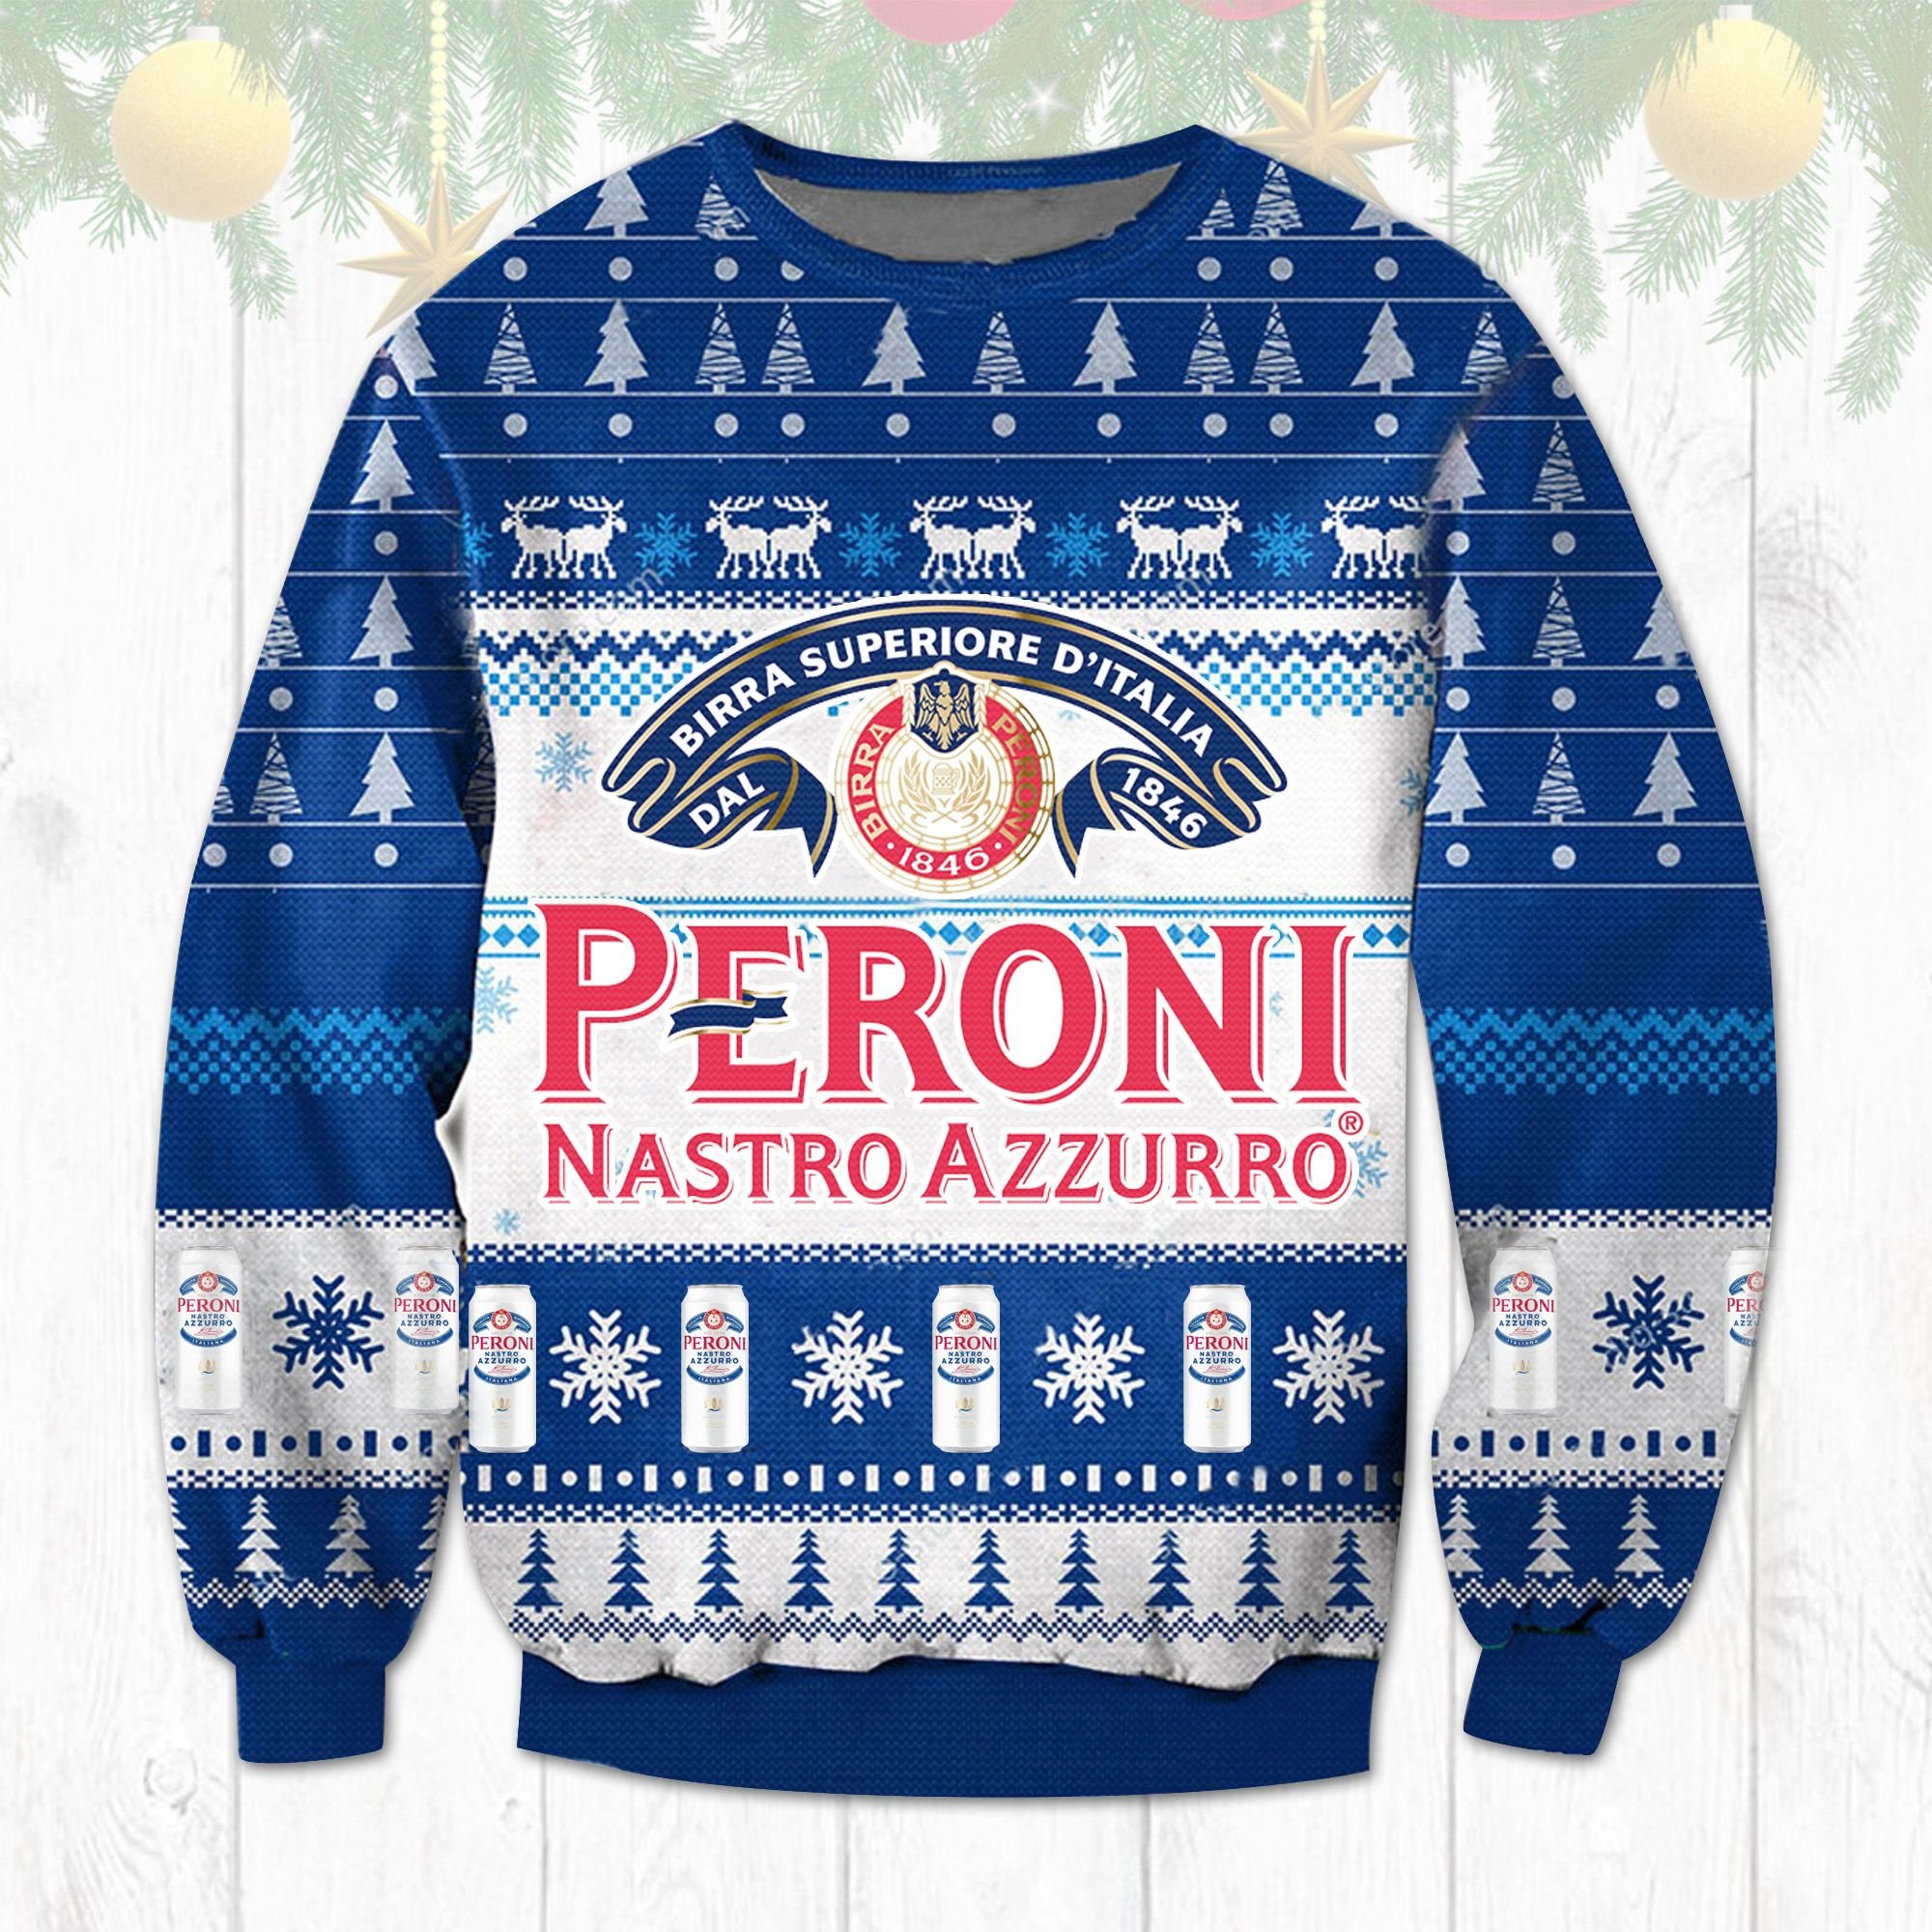 Peroni Nastro Azzurro Import Lager Beer Christmas sweater 1